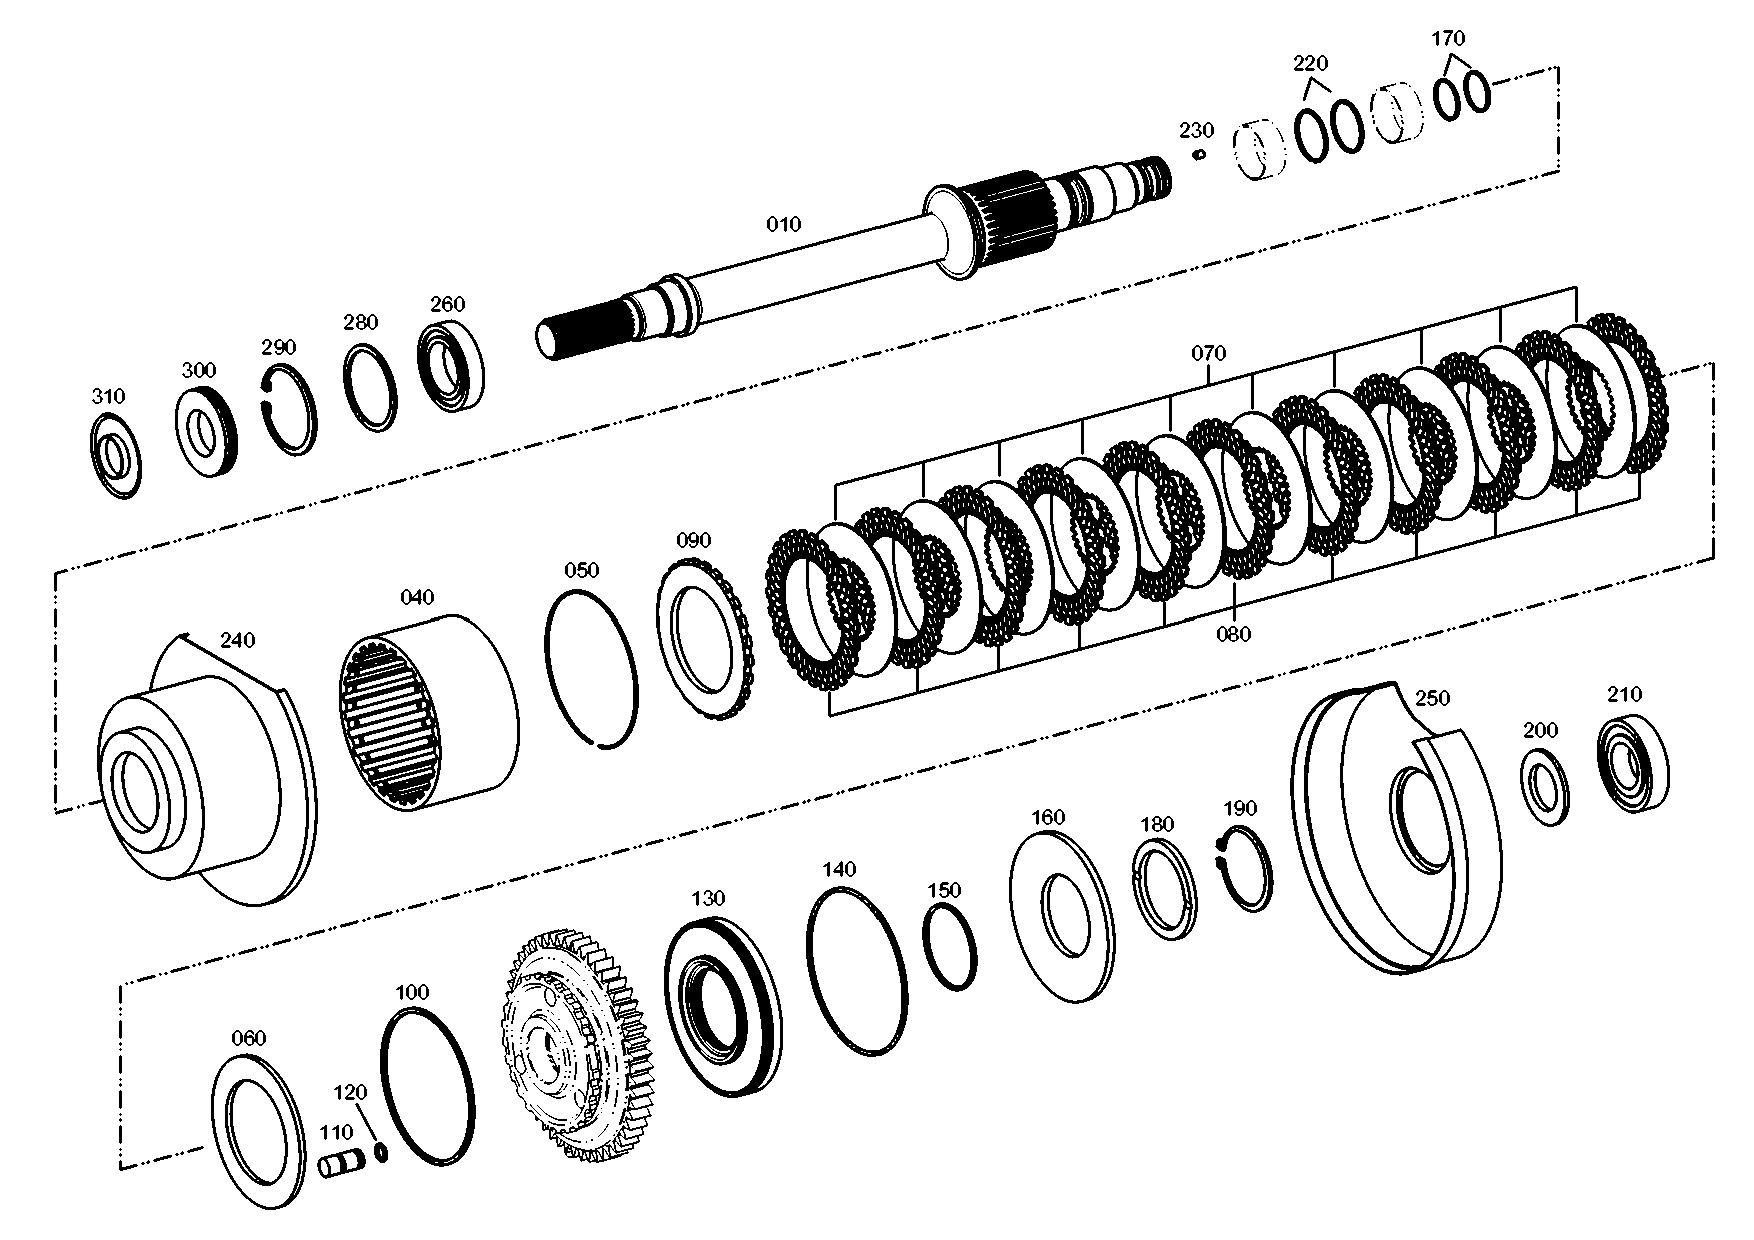 drawing for VOITH-GETRIEBE KG 01.0043.40 - O-RING (figure 3)